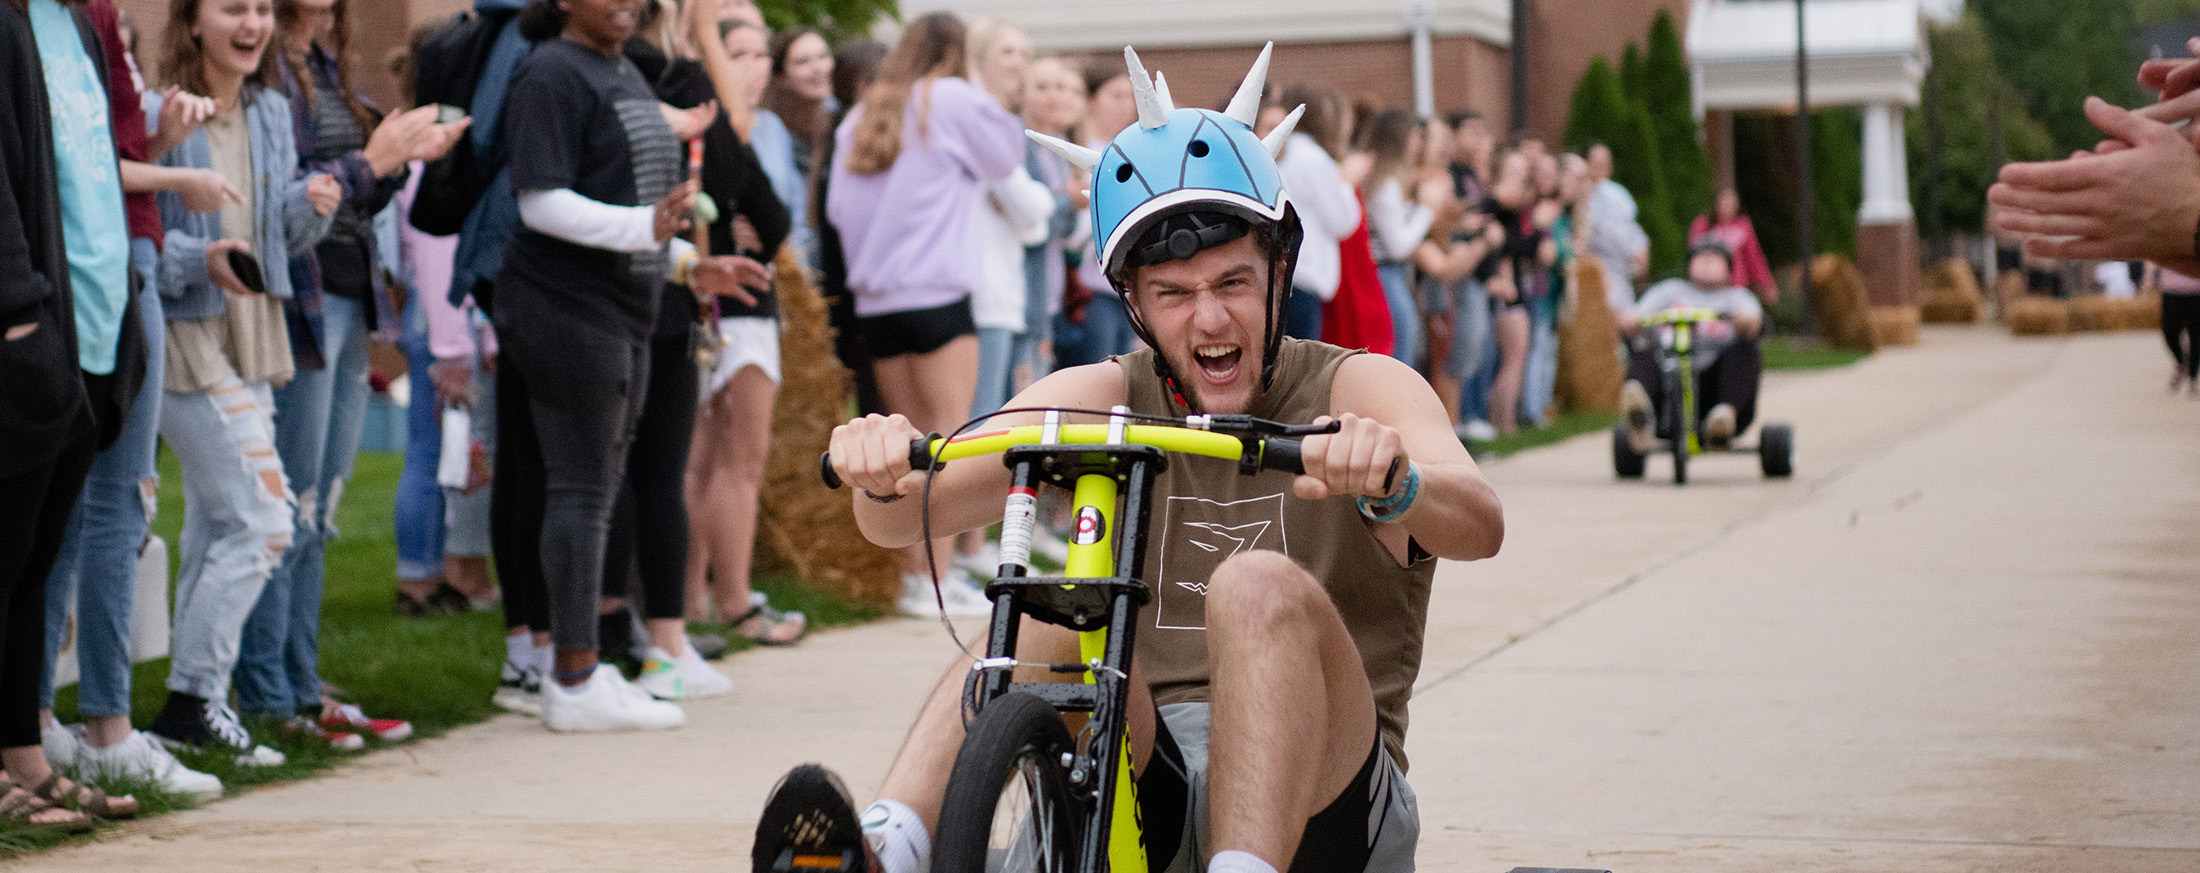 Student riding tricycle at IWU homecoming